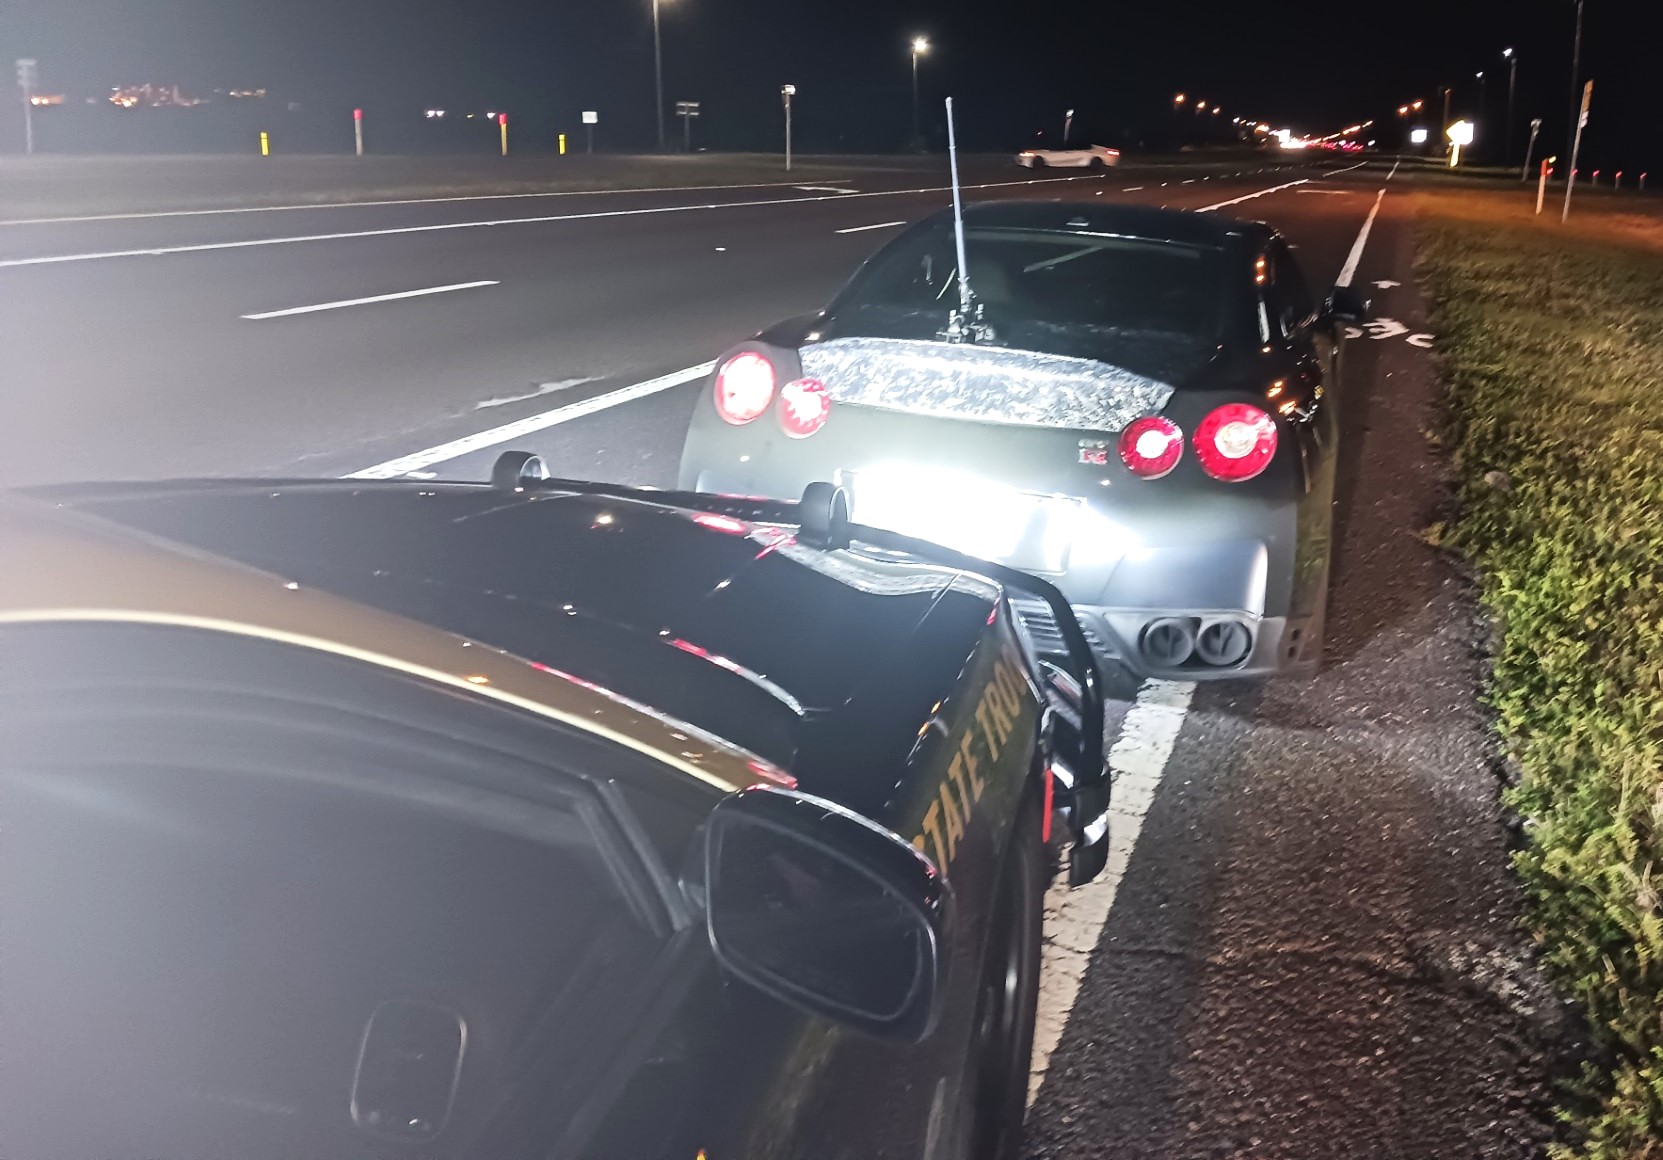 A state trooper on patrol along the Gandy Bridge in Tampa pulled over a Nissan GTR traveling over 100 mph on Oct. 20, 2023. The driver was charged with street racing. | Florida Highway Patrol via WUSF